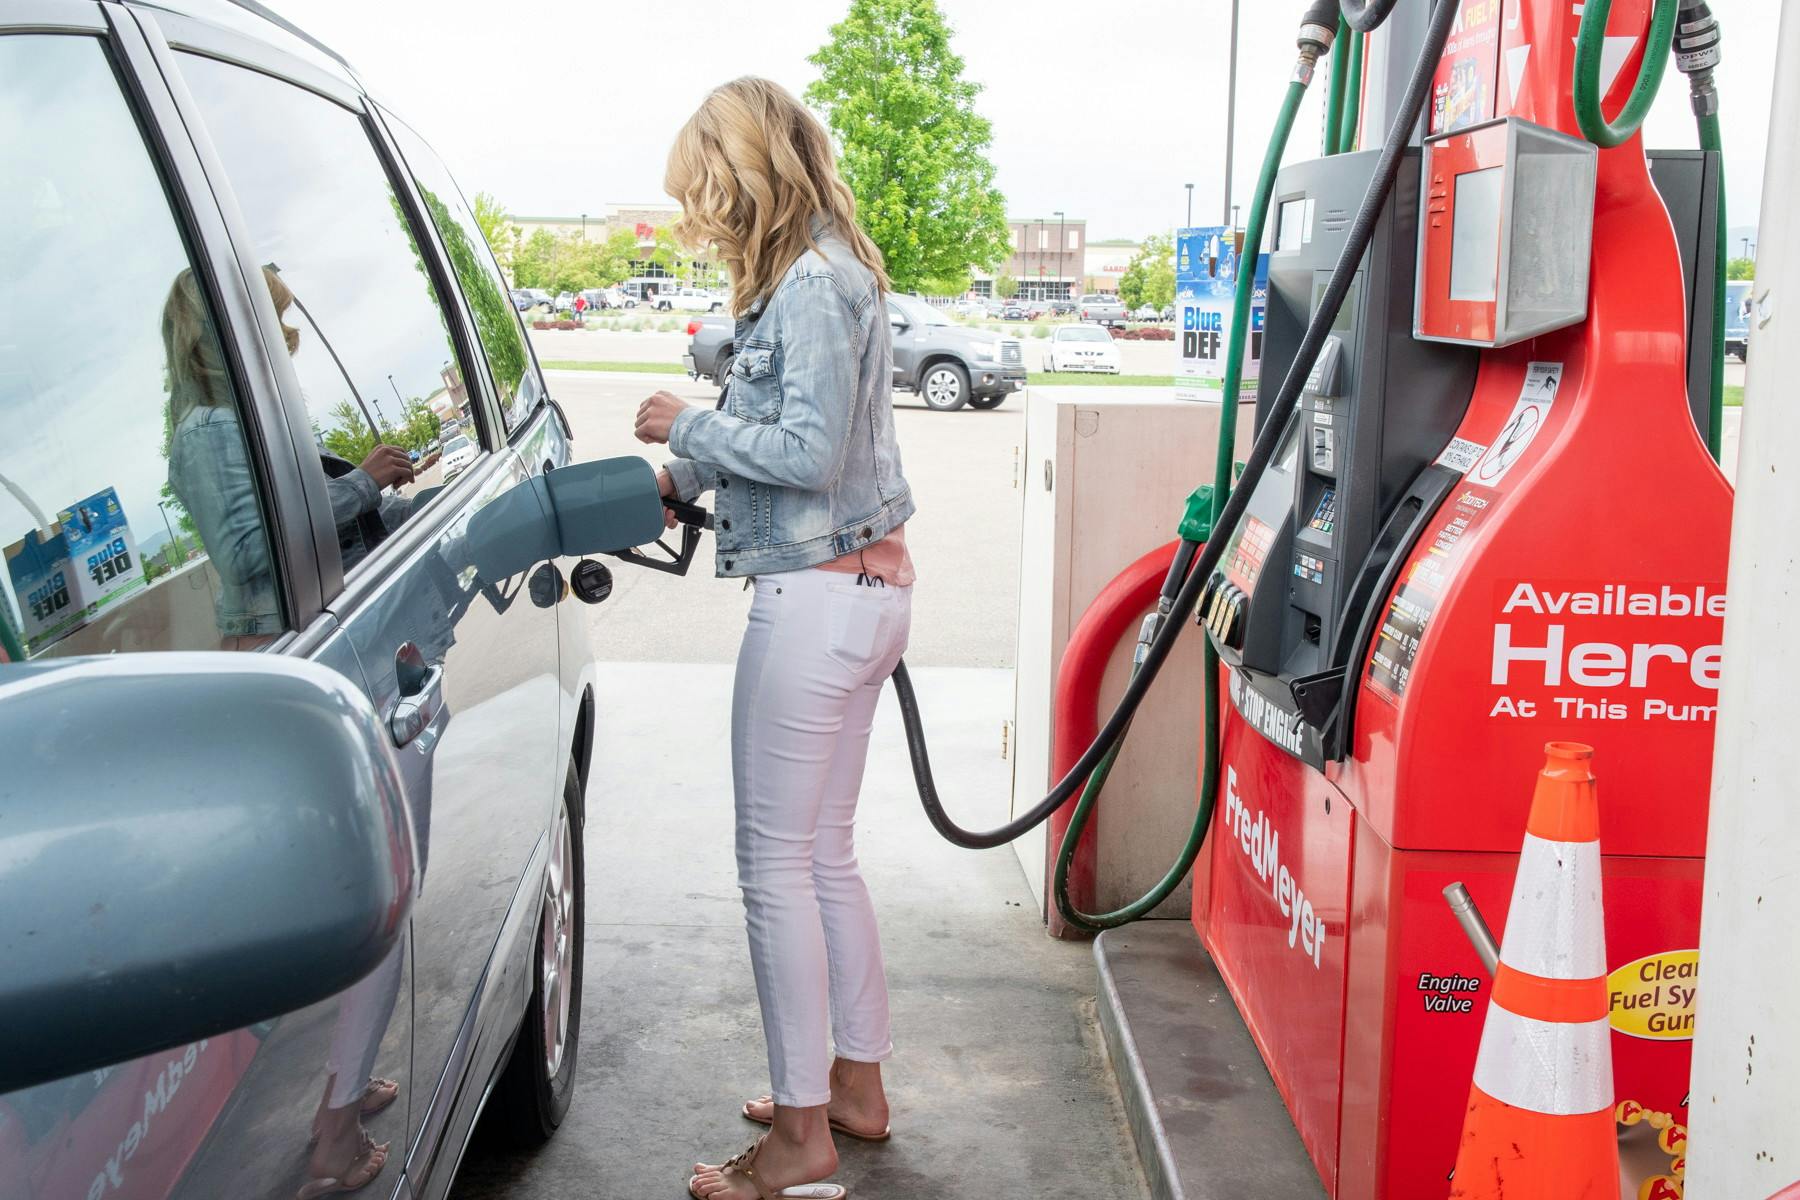 A person filling their vehicle with gas at a gas station pump.